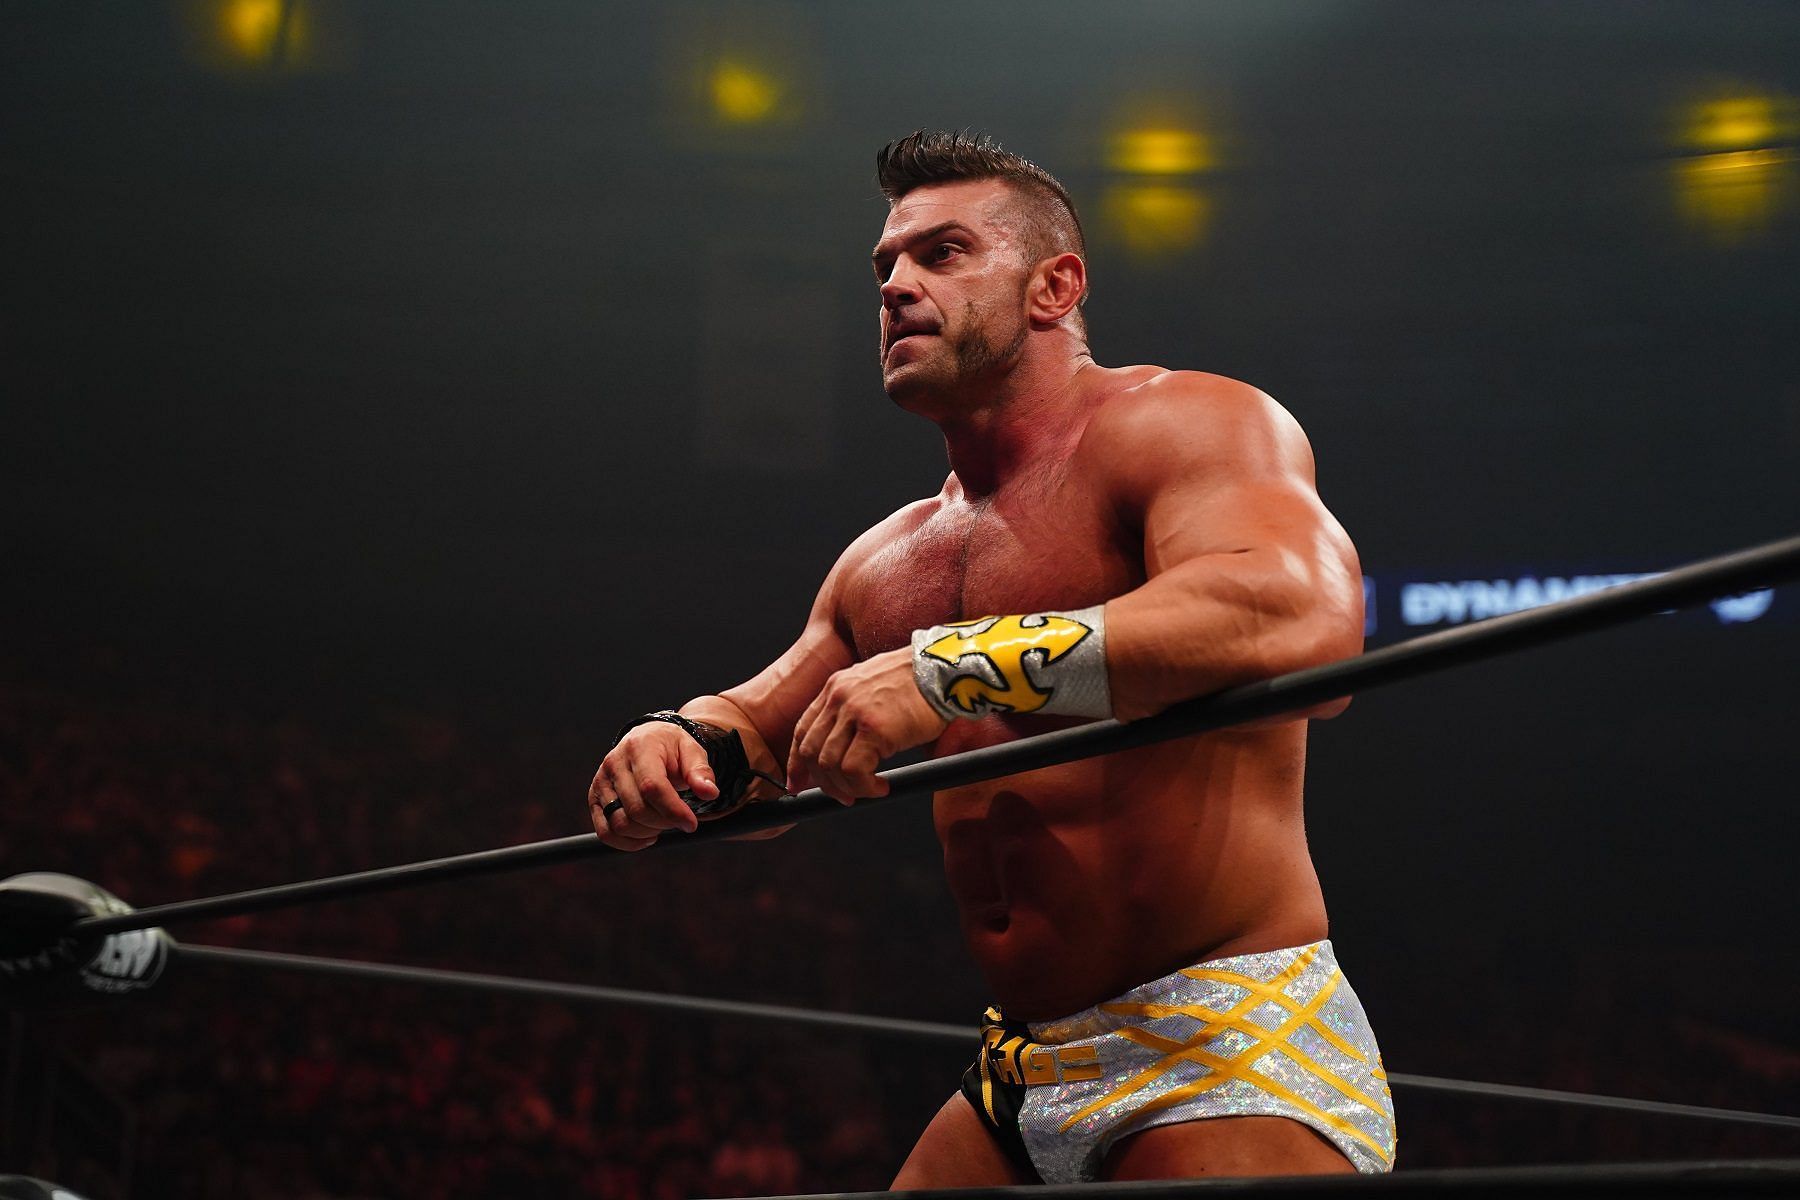 Brian Cage signed with AEW in early 2020